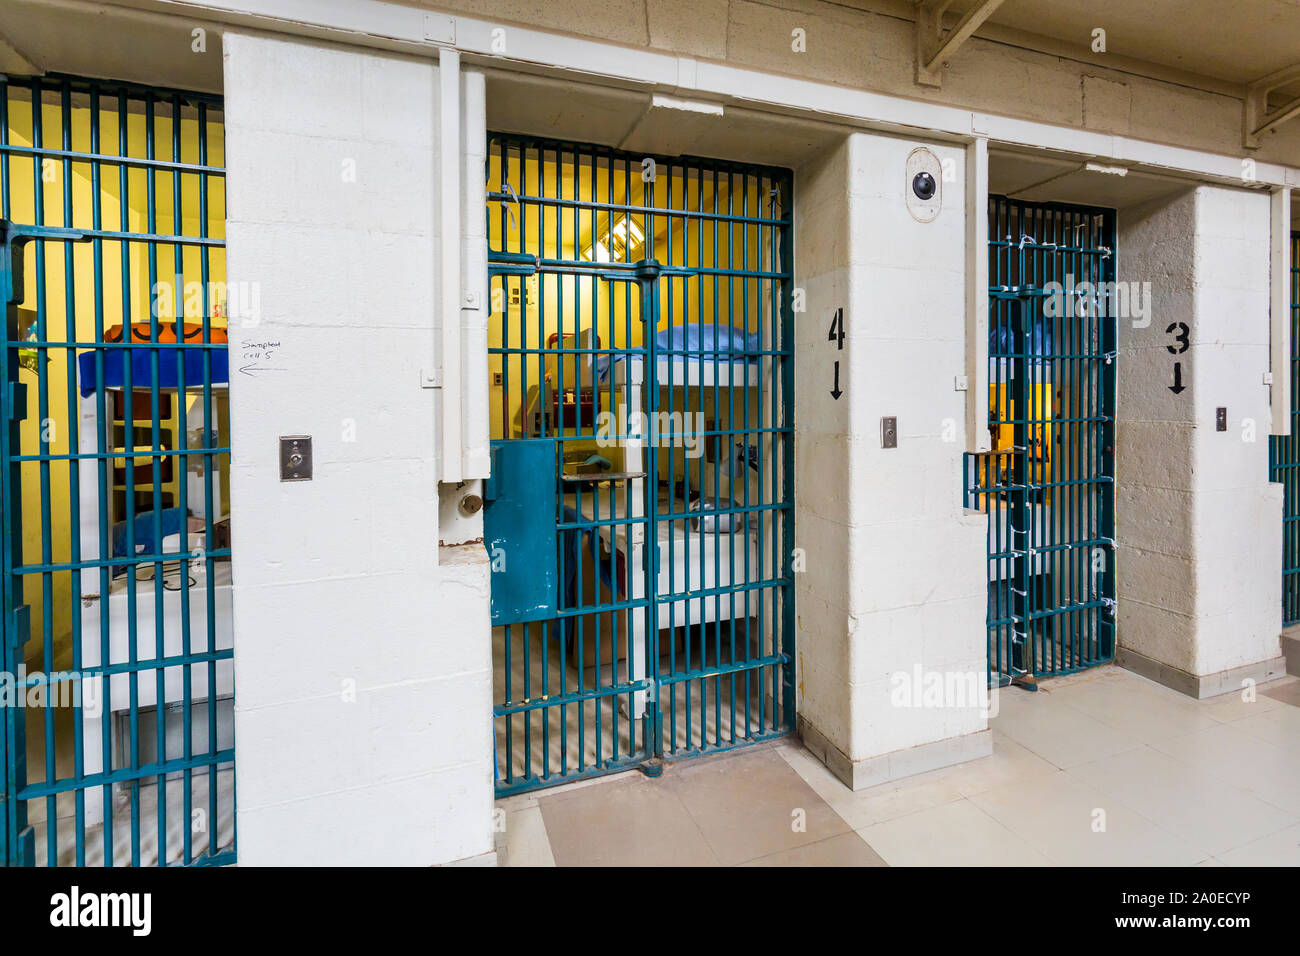 row of jail cell doors Kingston Penitentiary a former maximum security prison that opened June 1835 and closed September 2013 Stock Photo